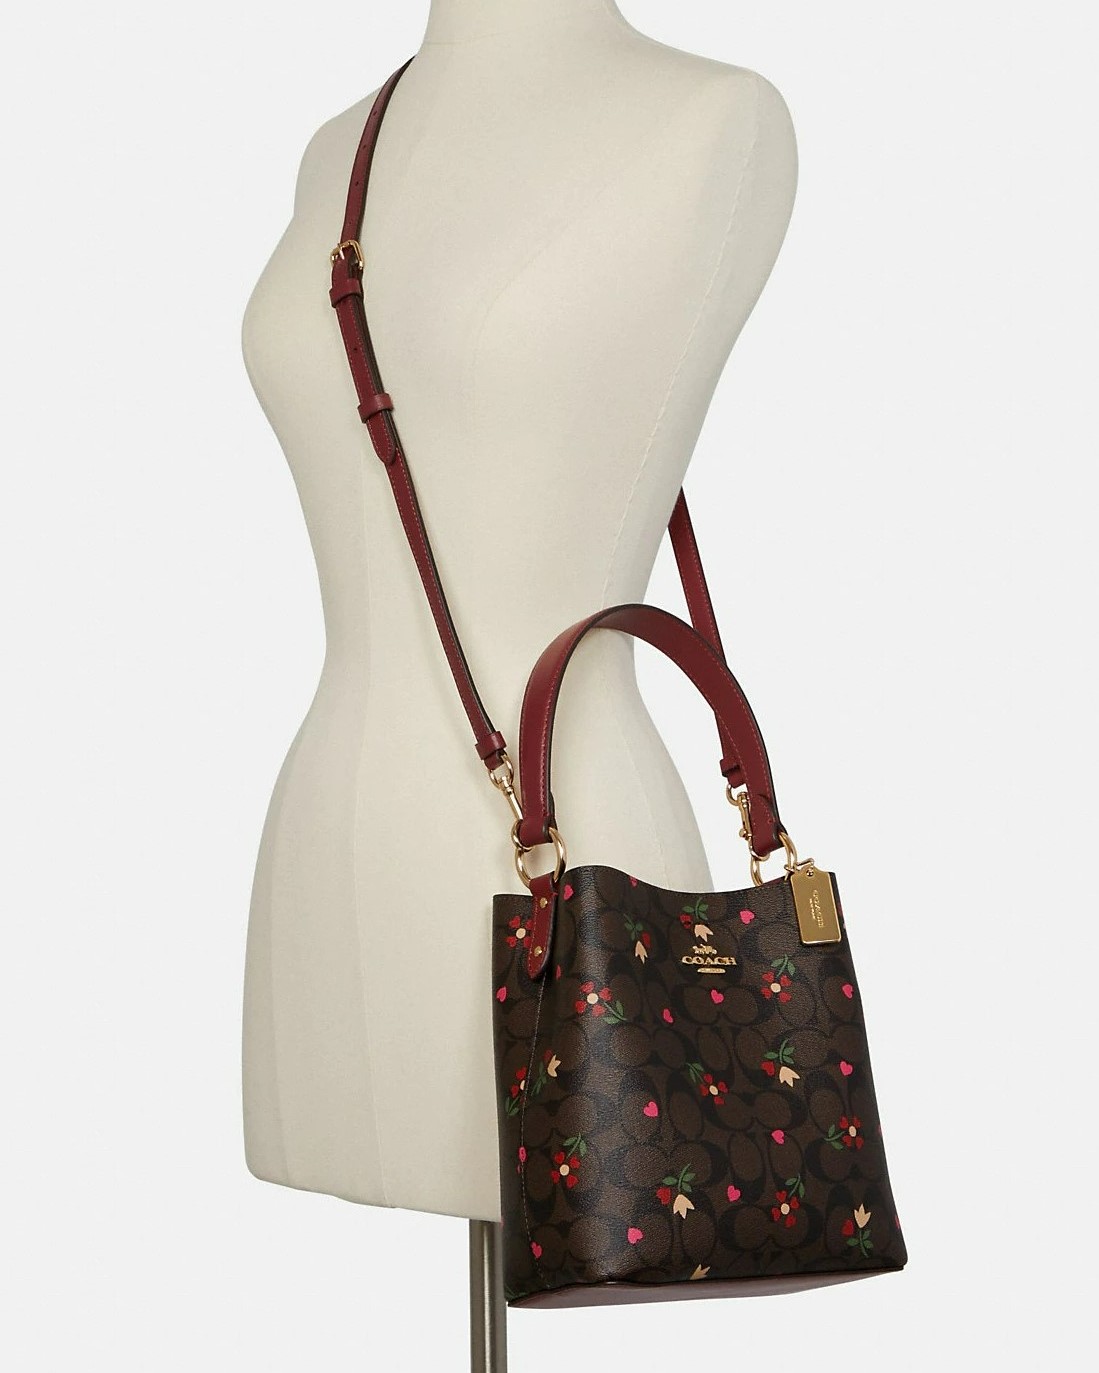 TÚI XÁCH NỮ COACH SMALL TOWN BUCKET BAG IN BROWN MULTI SIGNATURE CANVAS WITH HEART PETAL PRINT 4